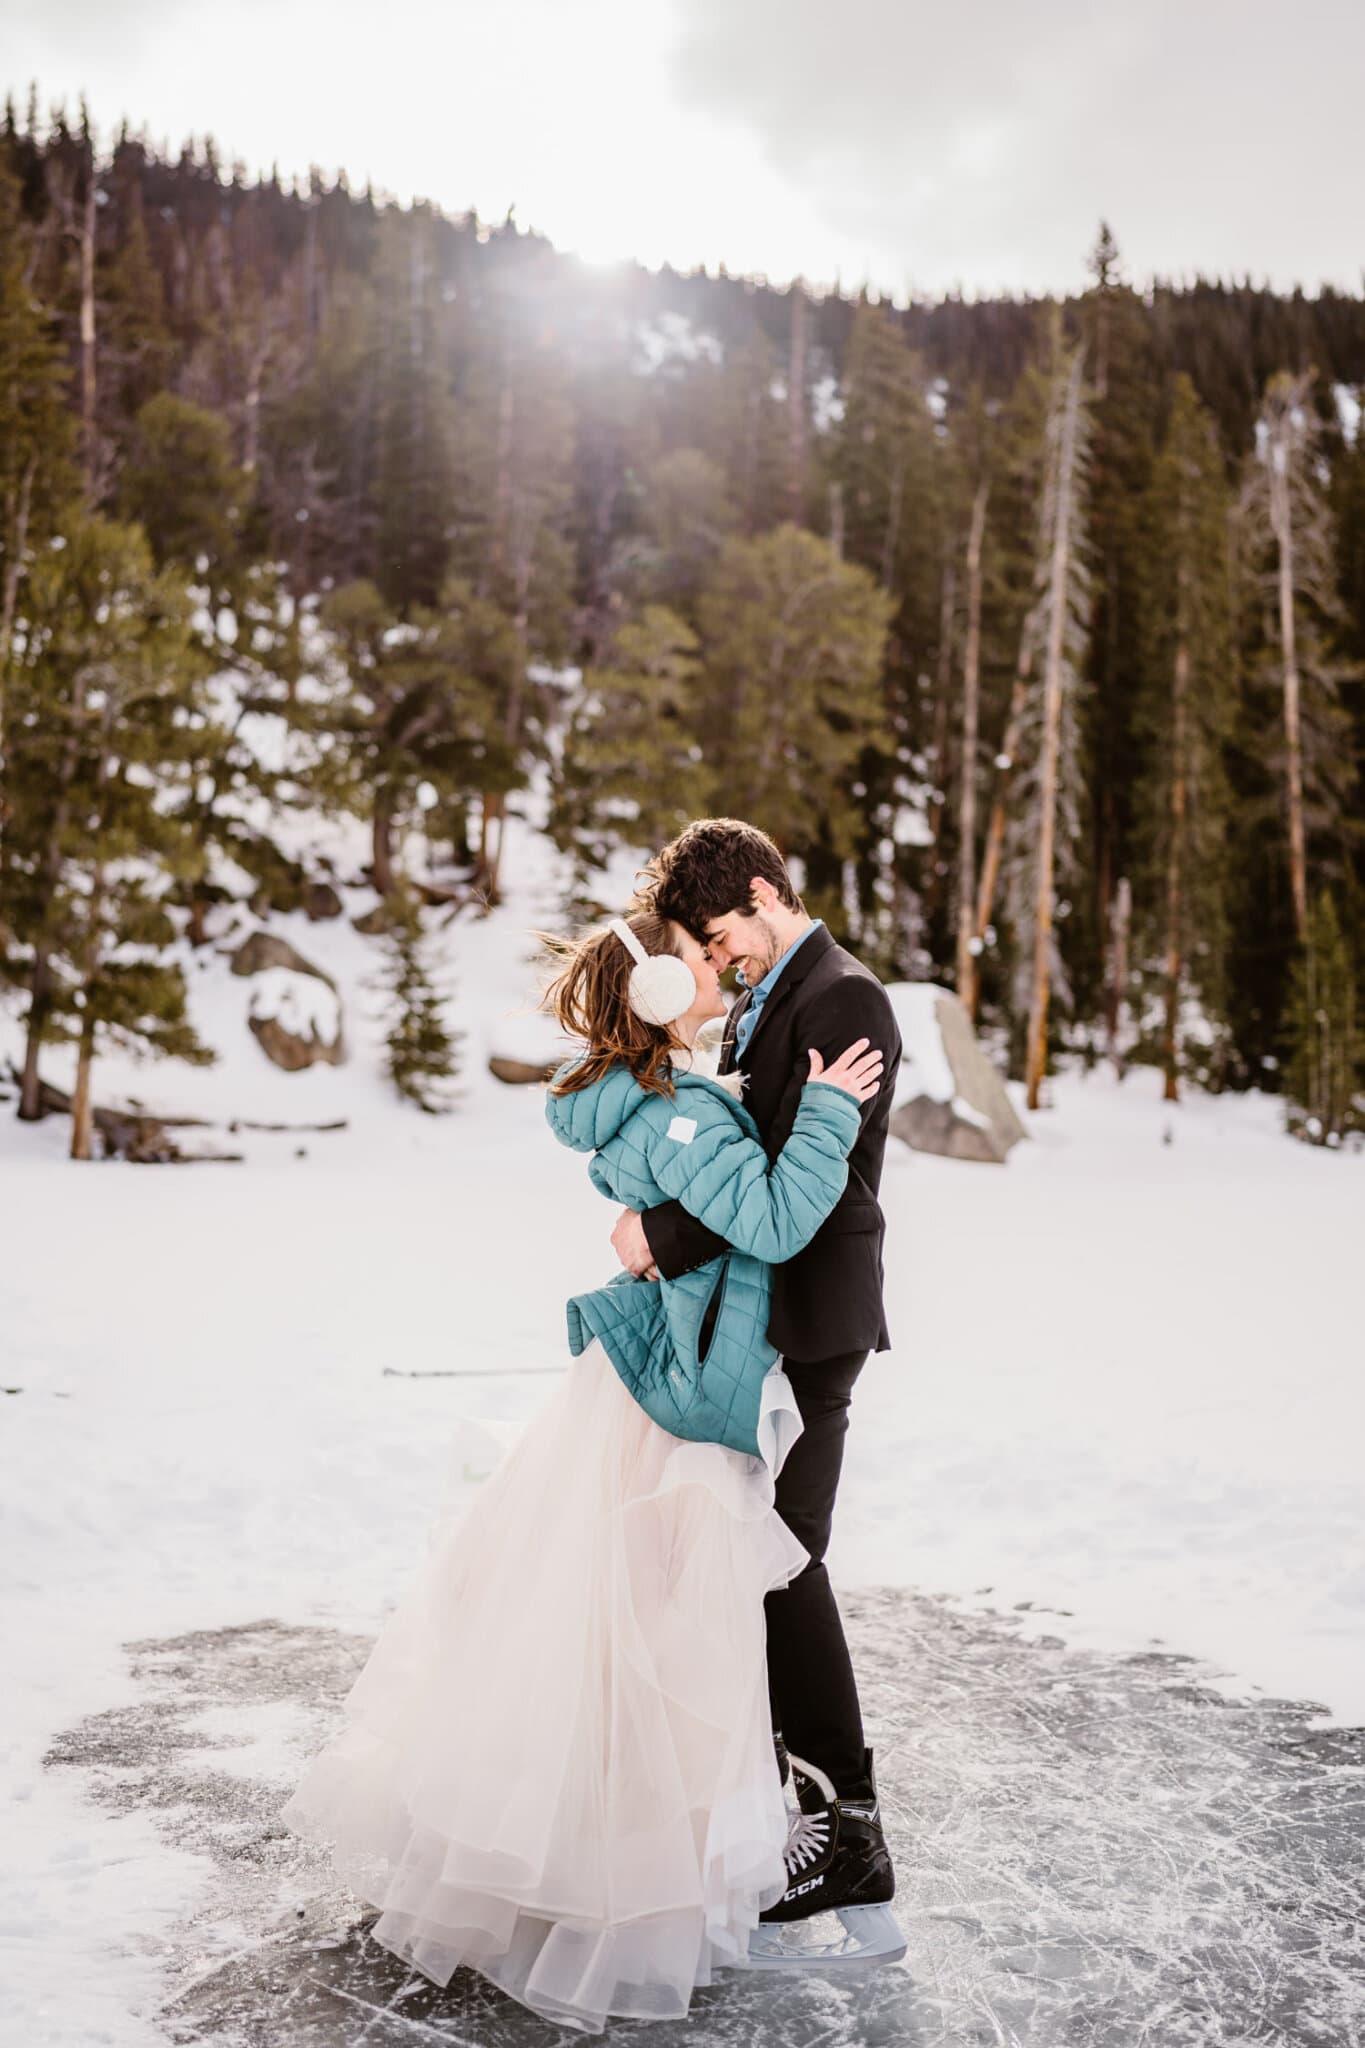 An elopement with the bride and groom ice skating in Colorado during the winter time.